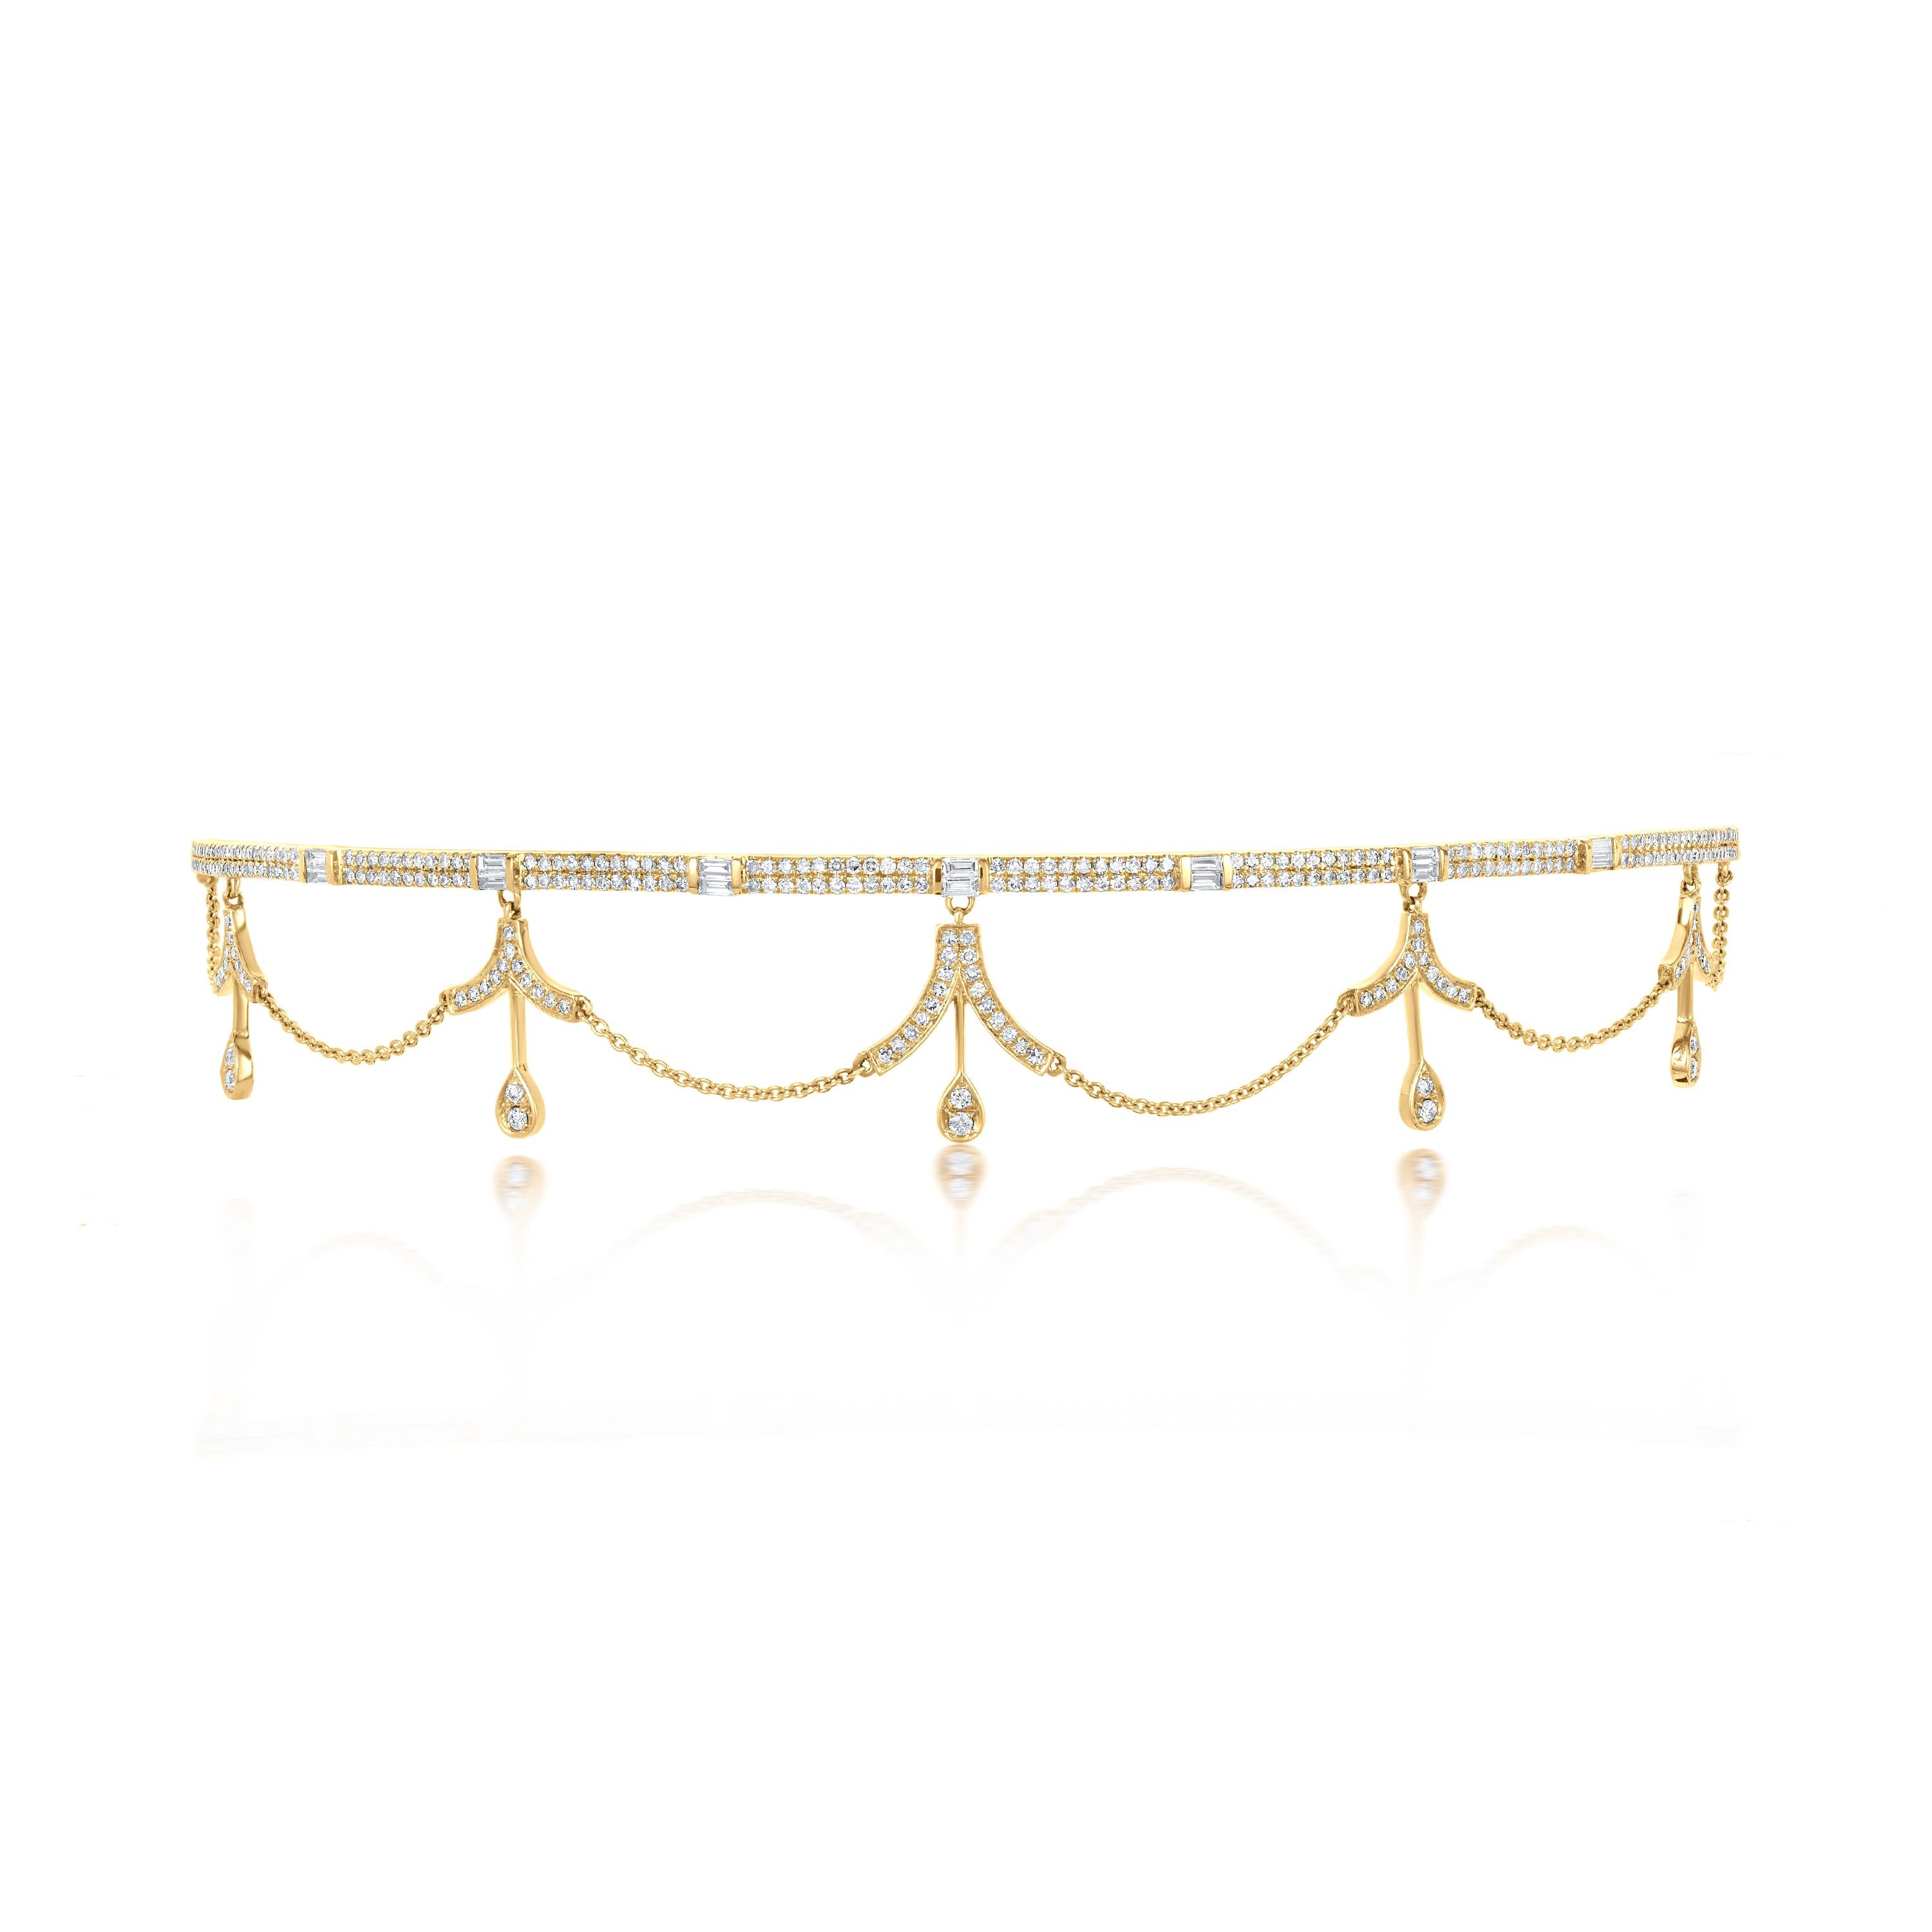 This beautiful choker necklace is made by Luxle in 14K Yellow gold with 322 round diamonds joined in a chain pattern with hanging pear shape droplets for a modern appeal. It has a lobster lock and an extended chain. The diamonds have a color grade